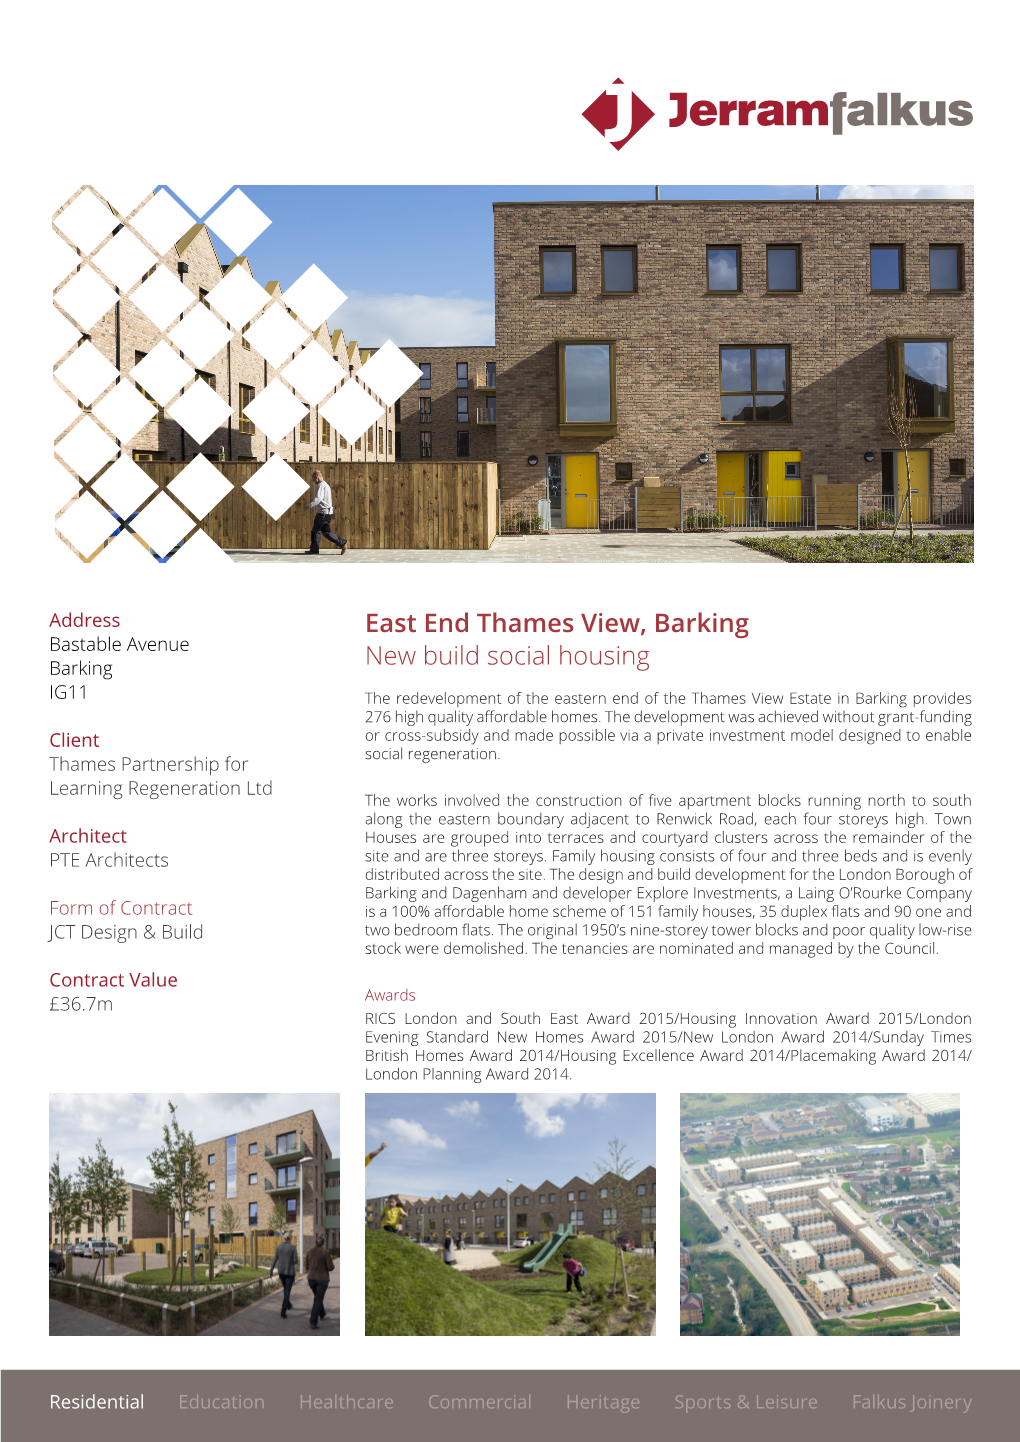 East End Thames View, Barking New Build Social Housing